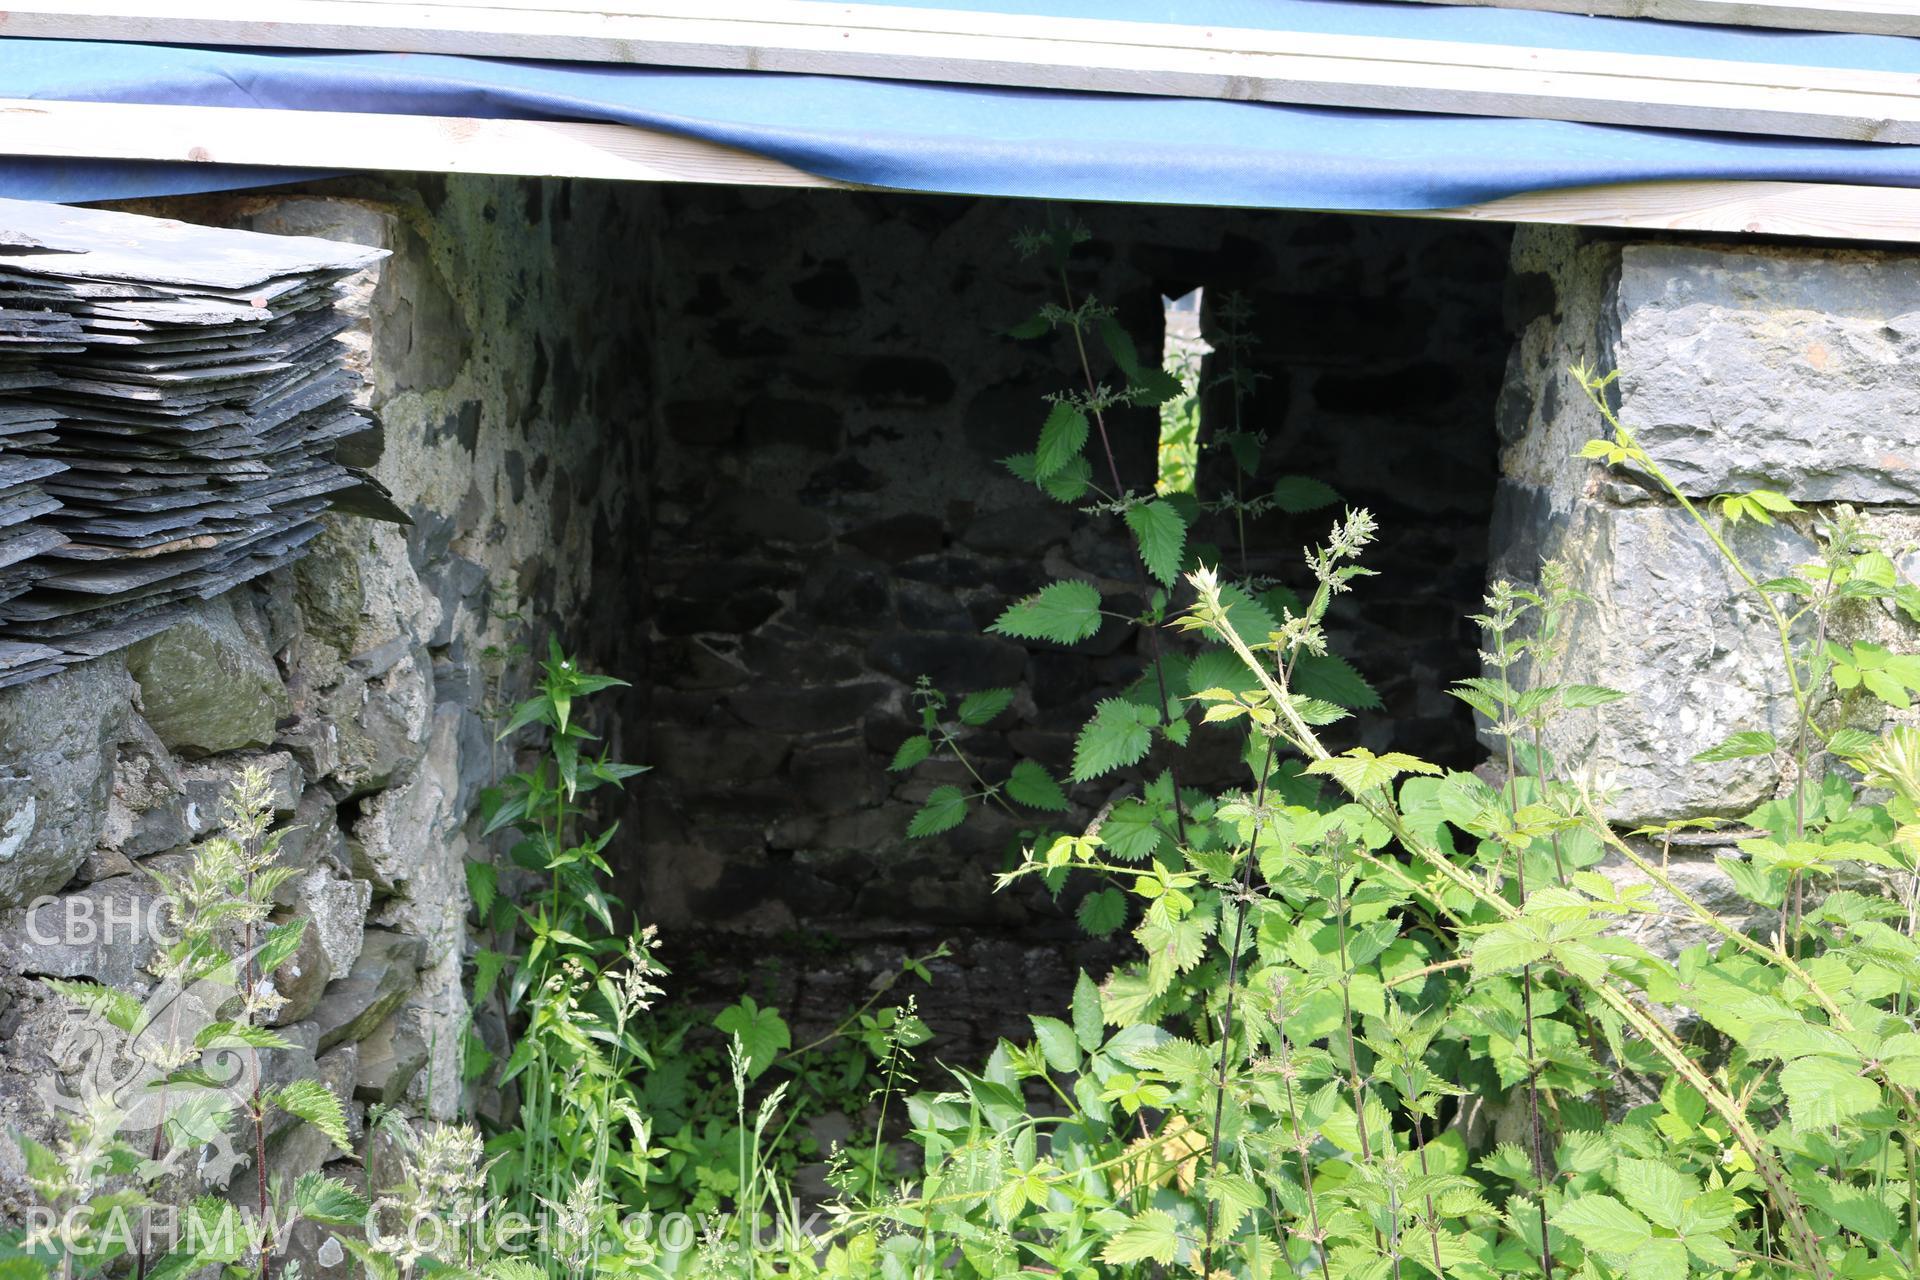 Photograph showing exterior view of pigsties, at Maes yr Hendre, taken by Dr Marian Gwyn, 6th July 2016. (Original Reference no. 0212)